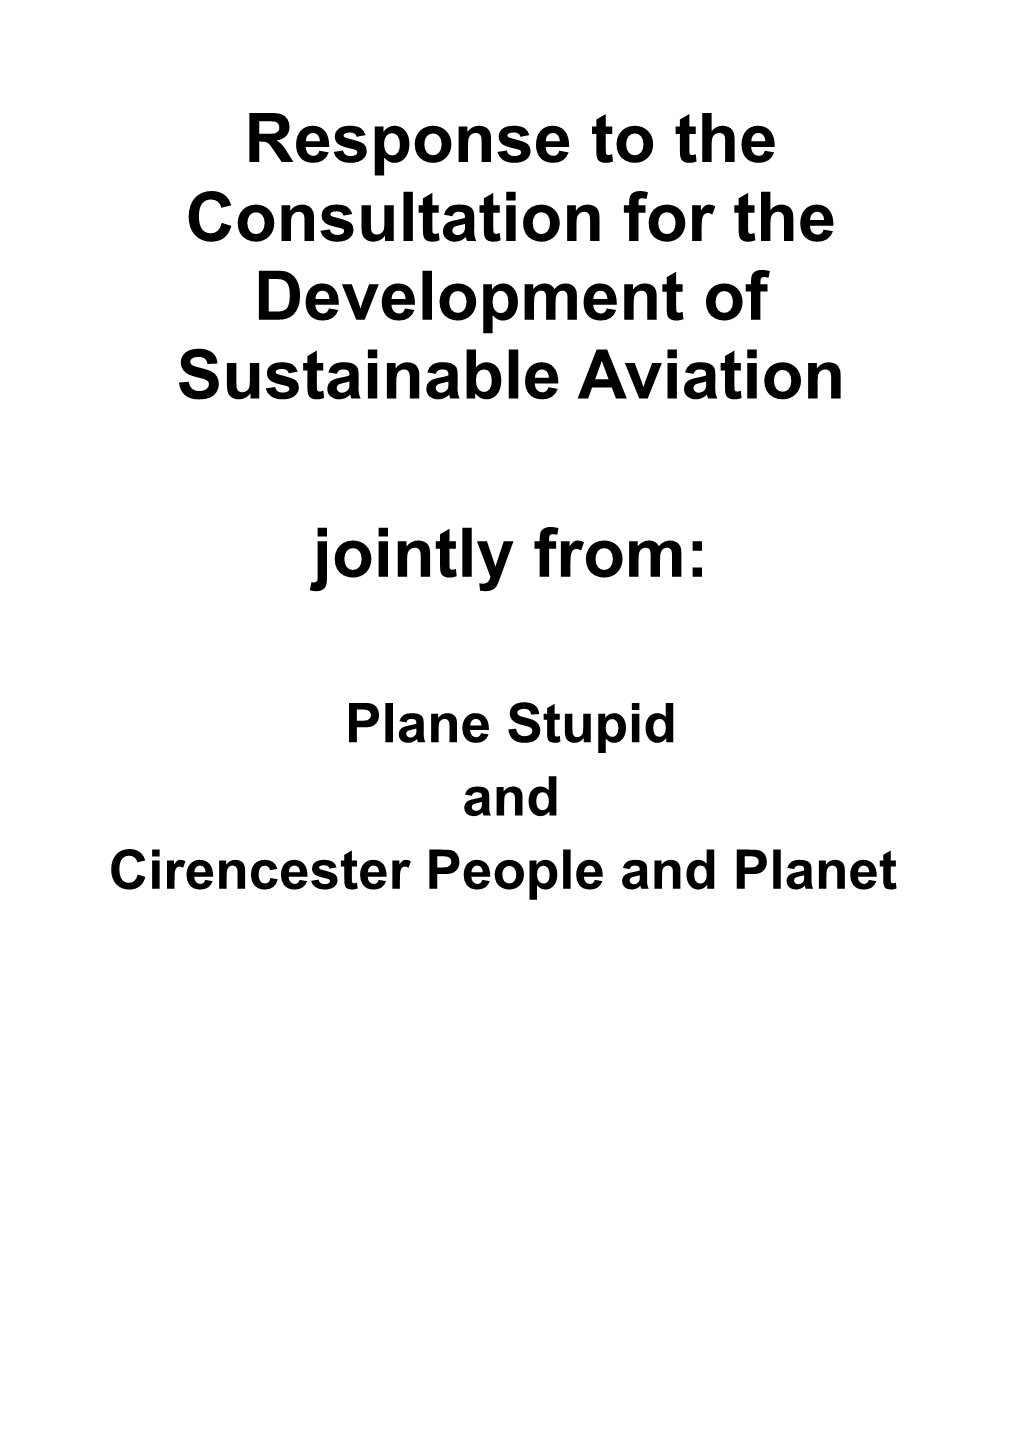 Response to the Consultation for the Development of Sustainable Aviation Jointly From